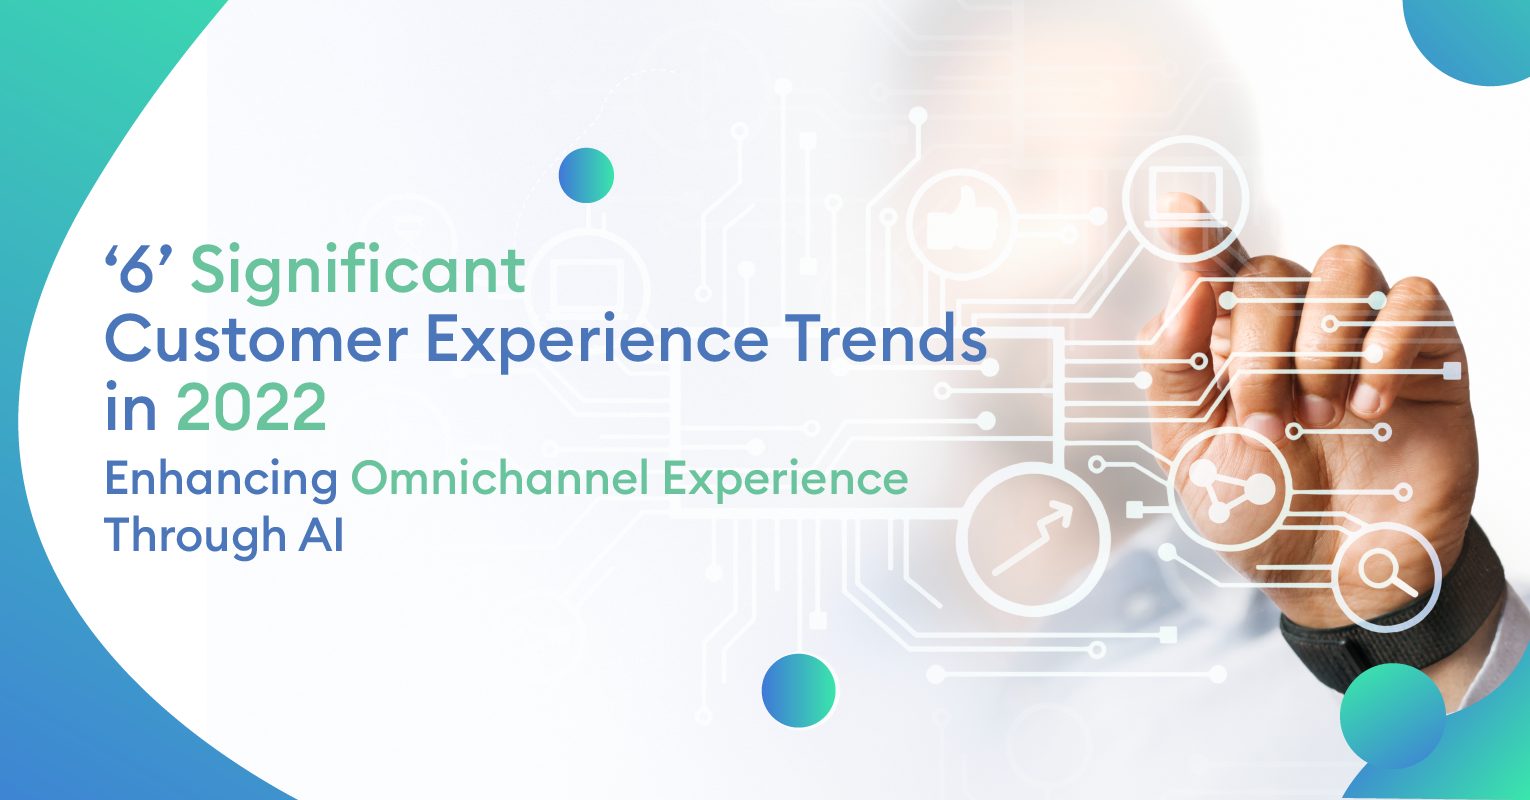 ‘6’ Significant Customer Experience Trends in 2022